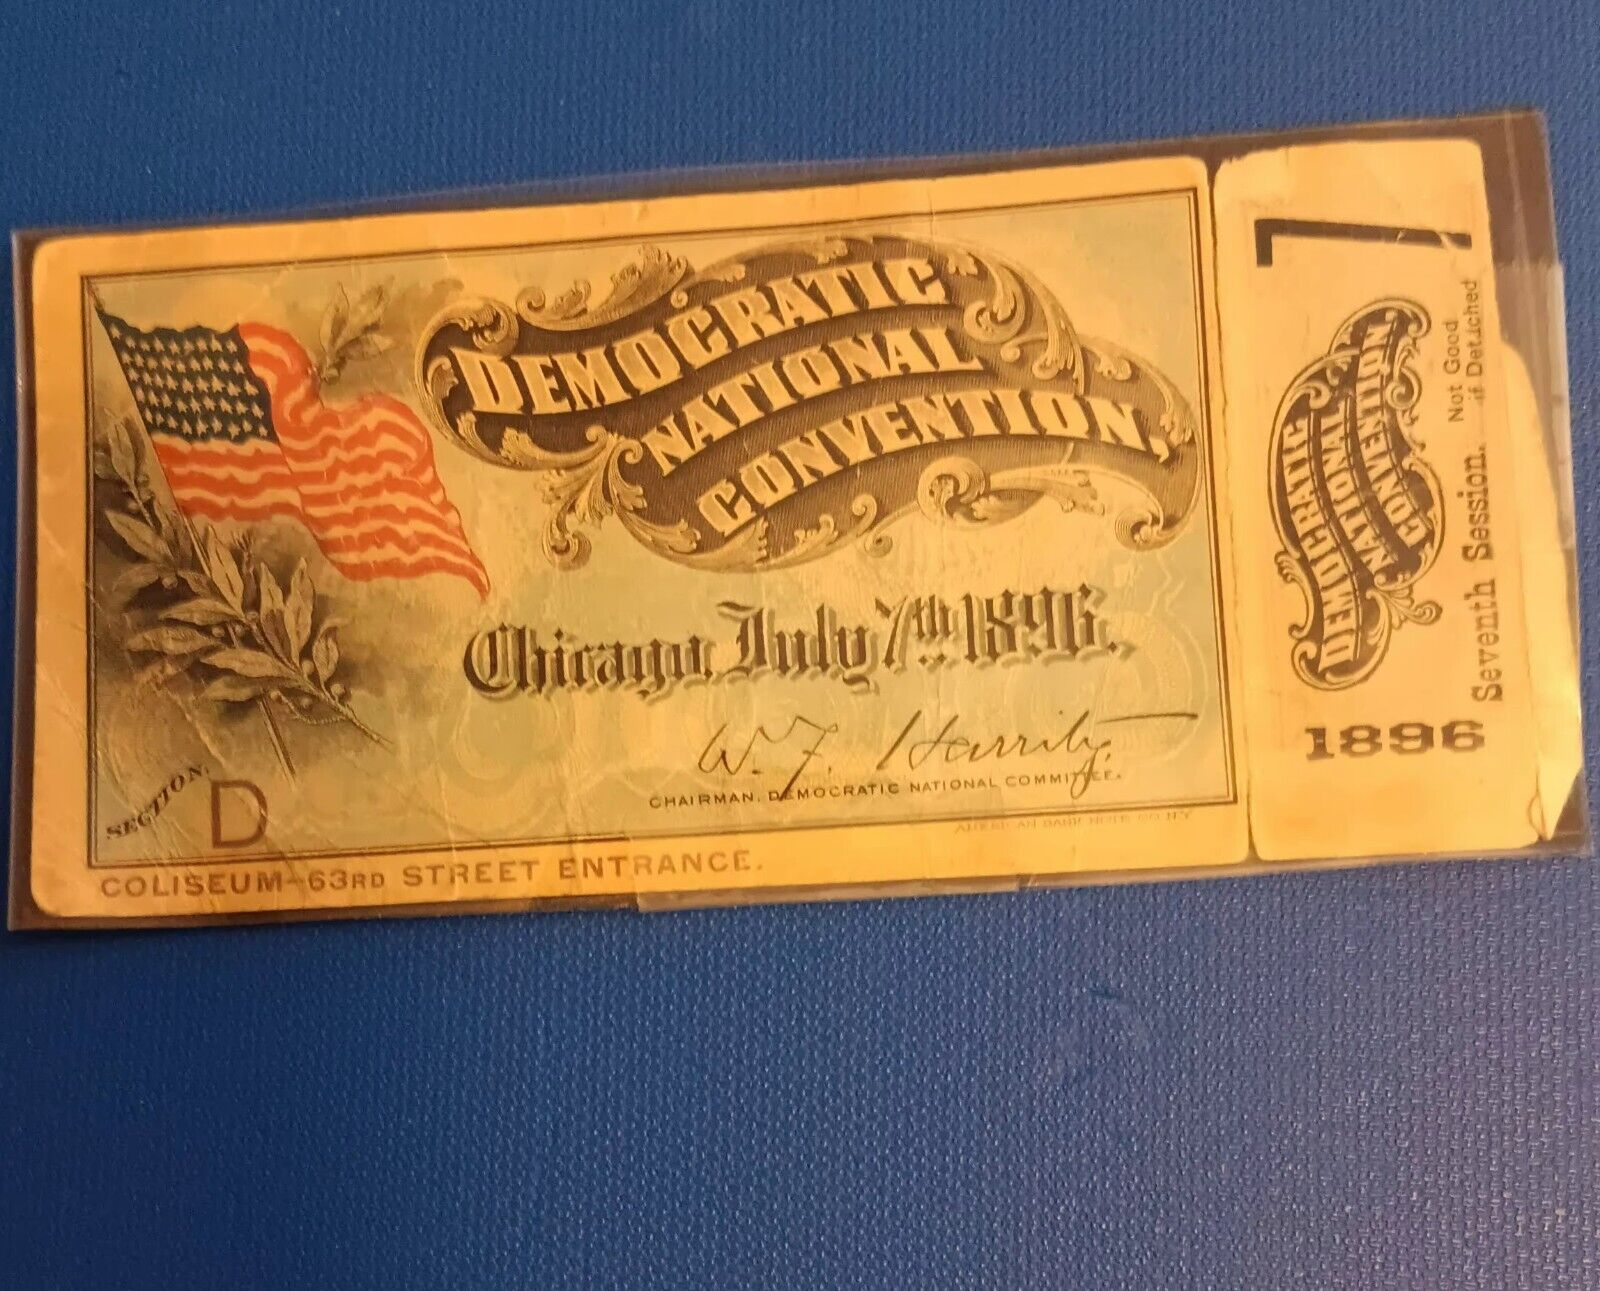 1896 Democratic national convention ticket